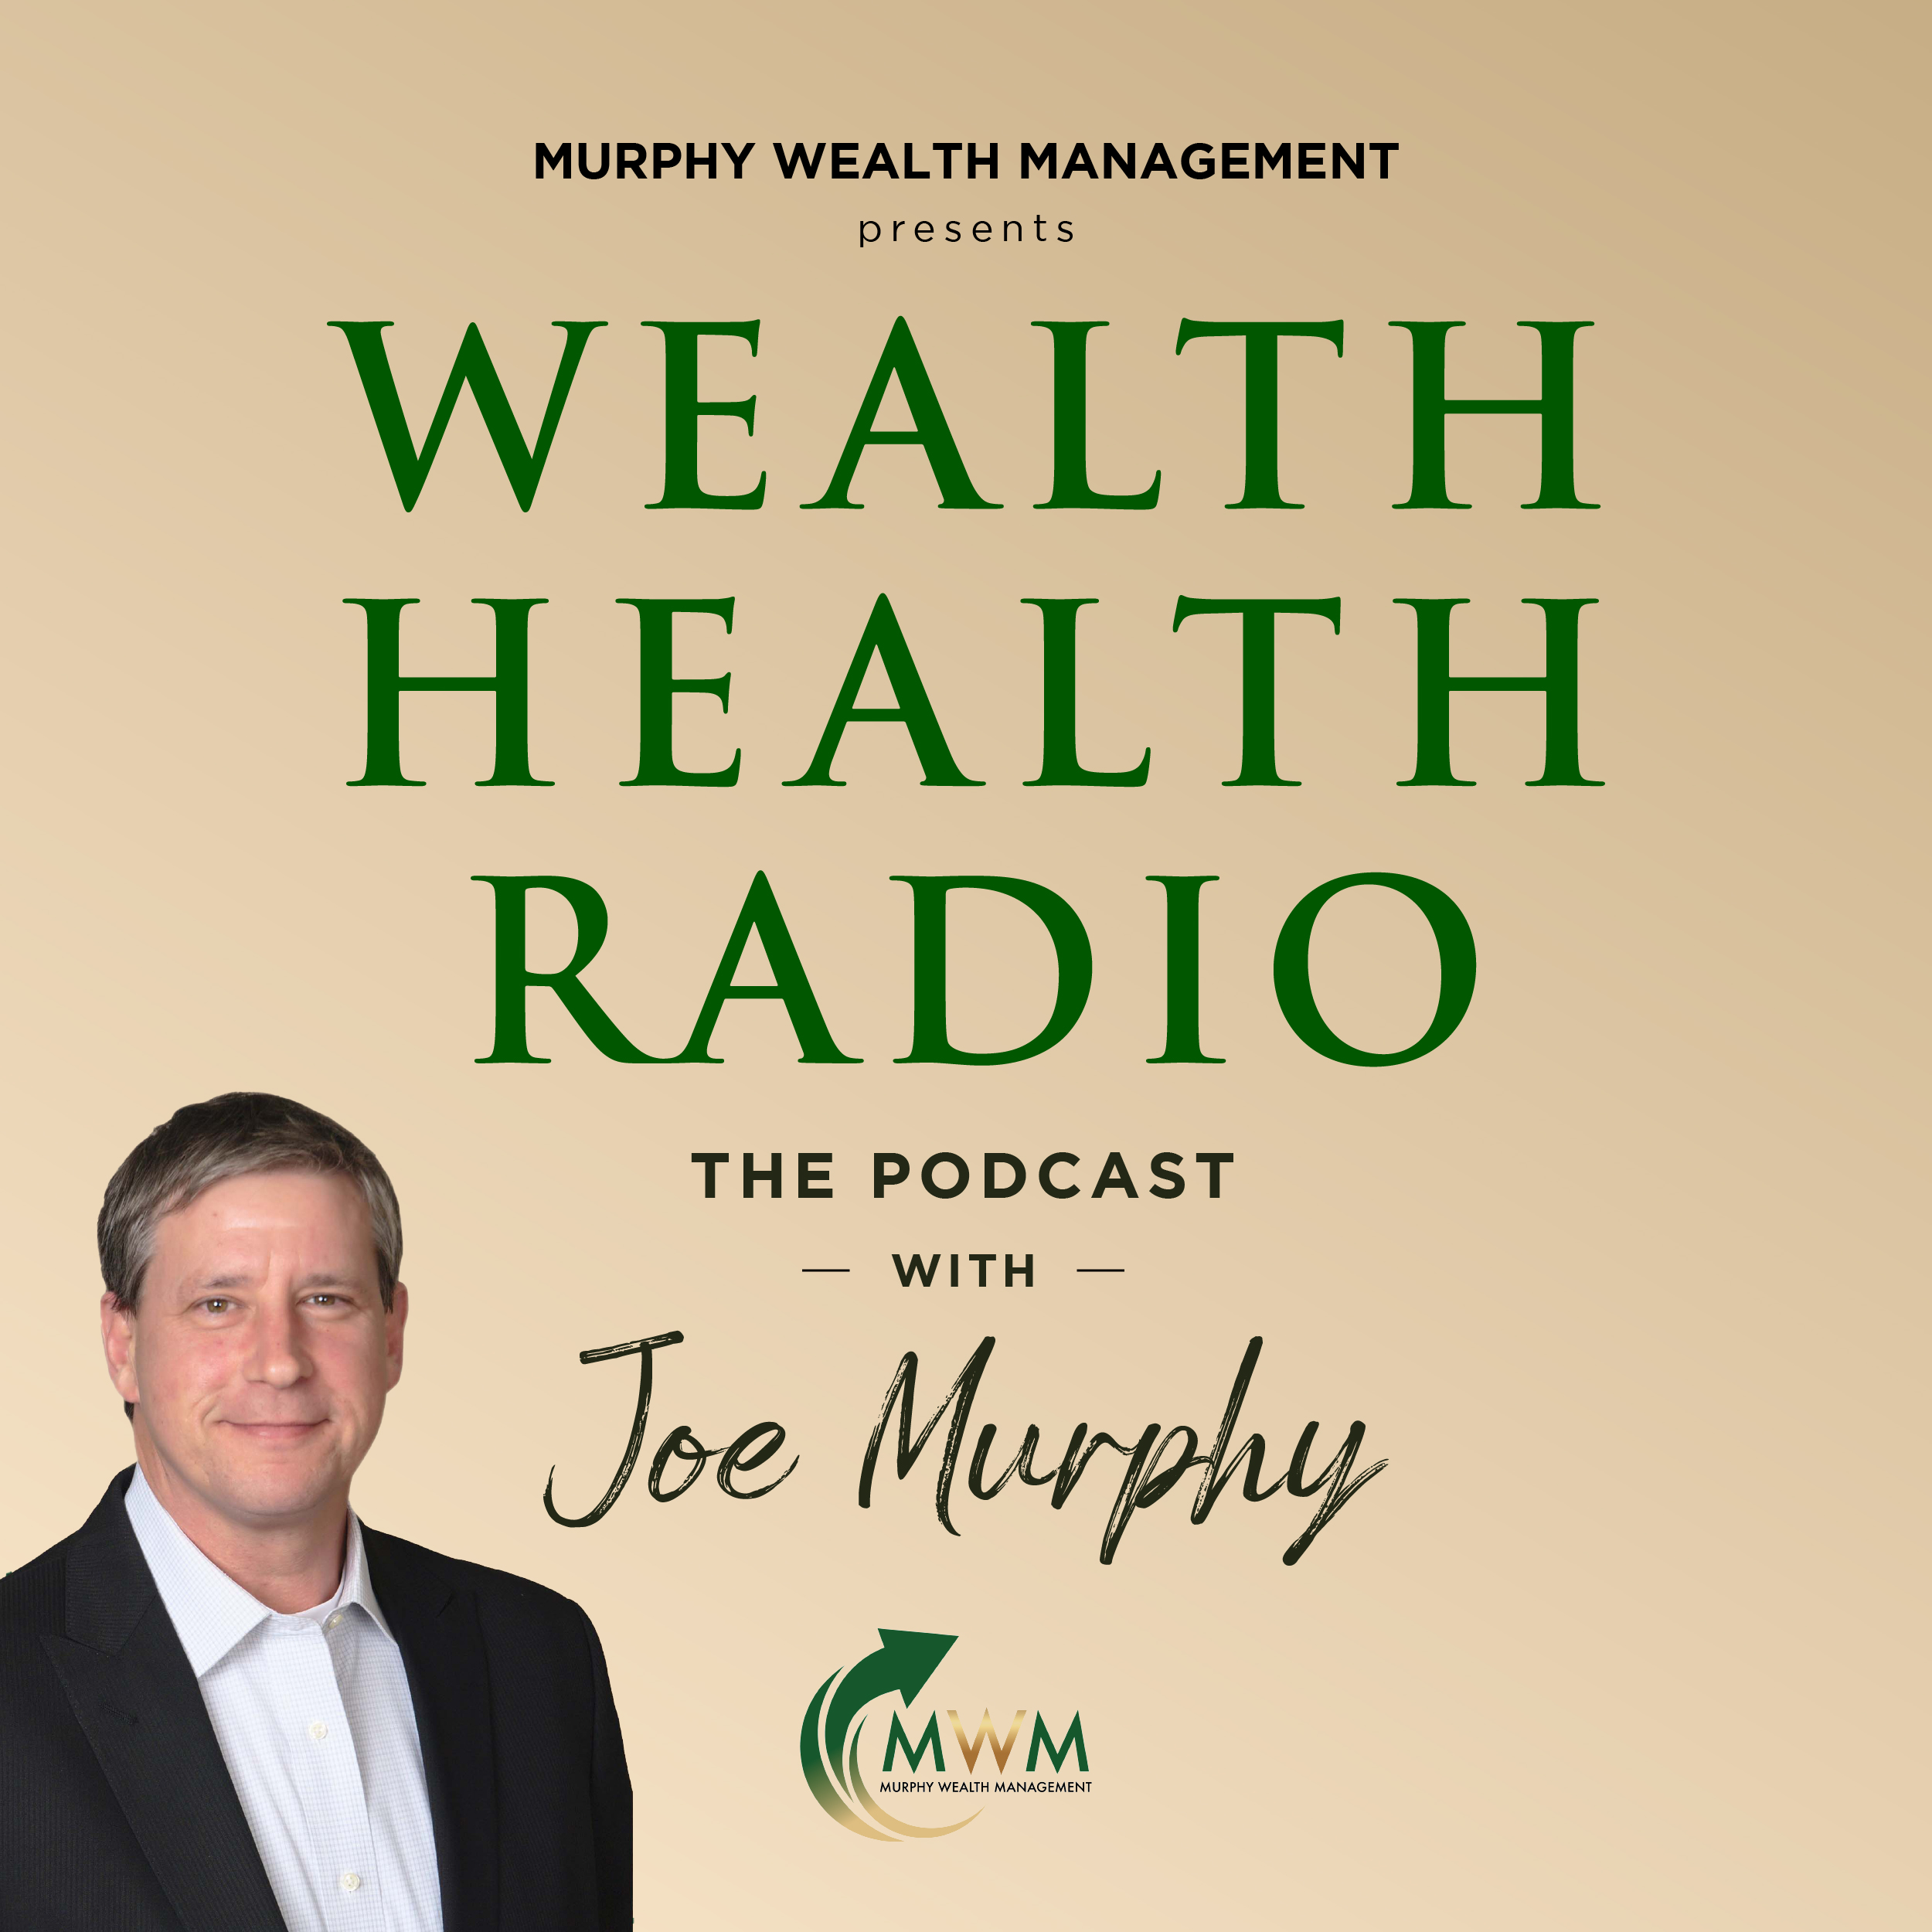 Joe and Steve discuss various financial topics, including the national debt, retirement planning, and investing options.